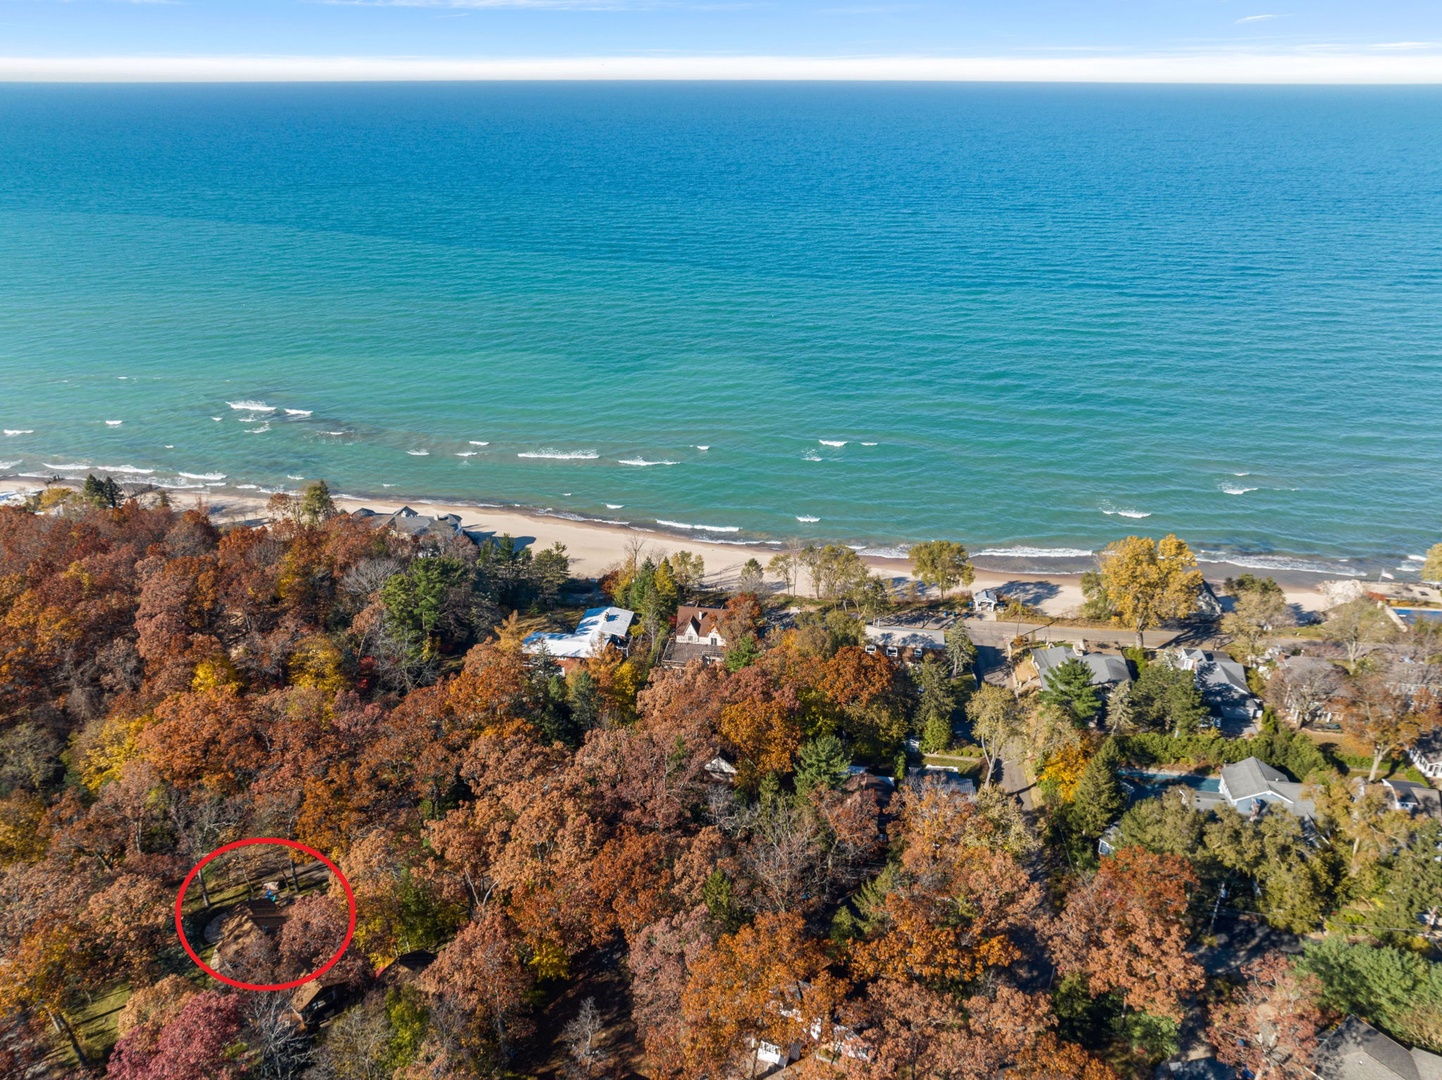 Here’s the proximity you’ll be to the magnificent Lake Michigan shoreline.